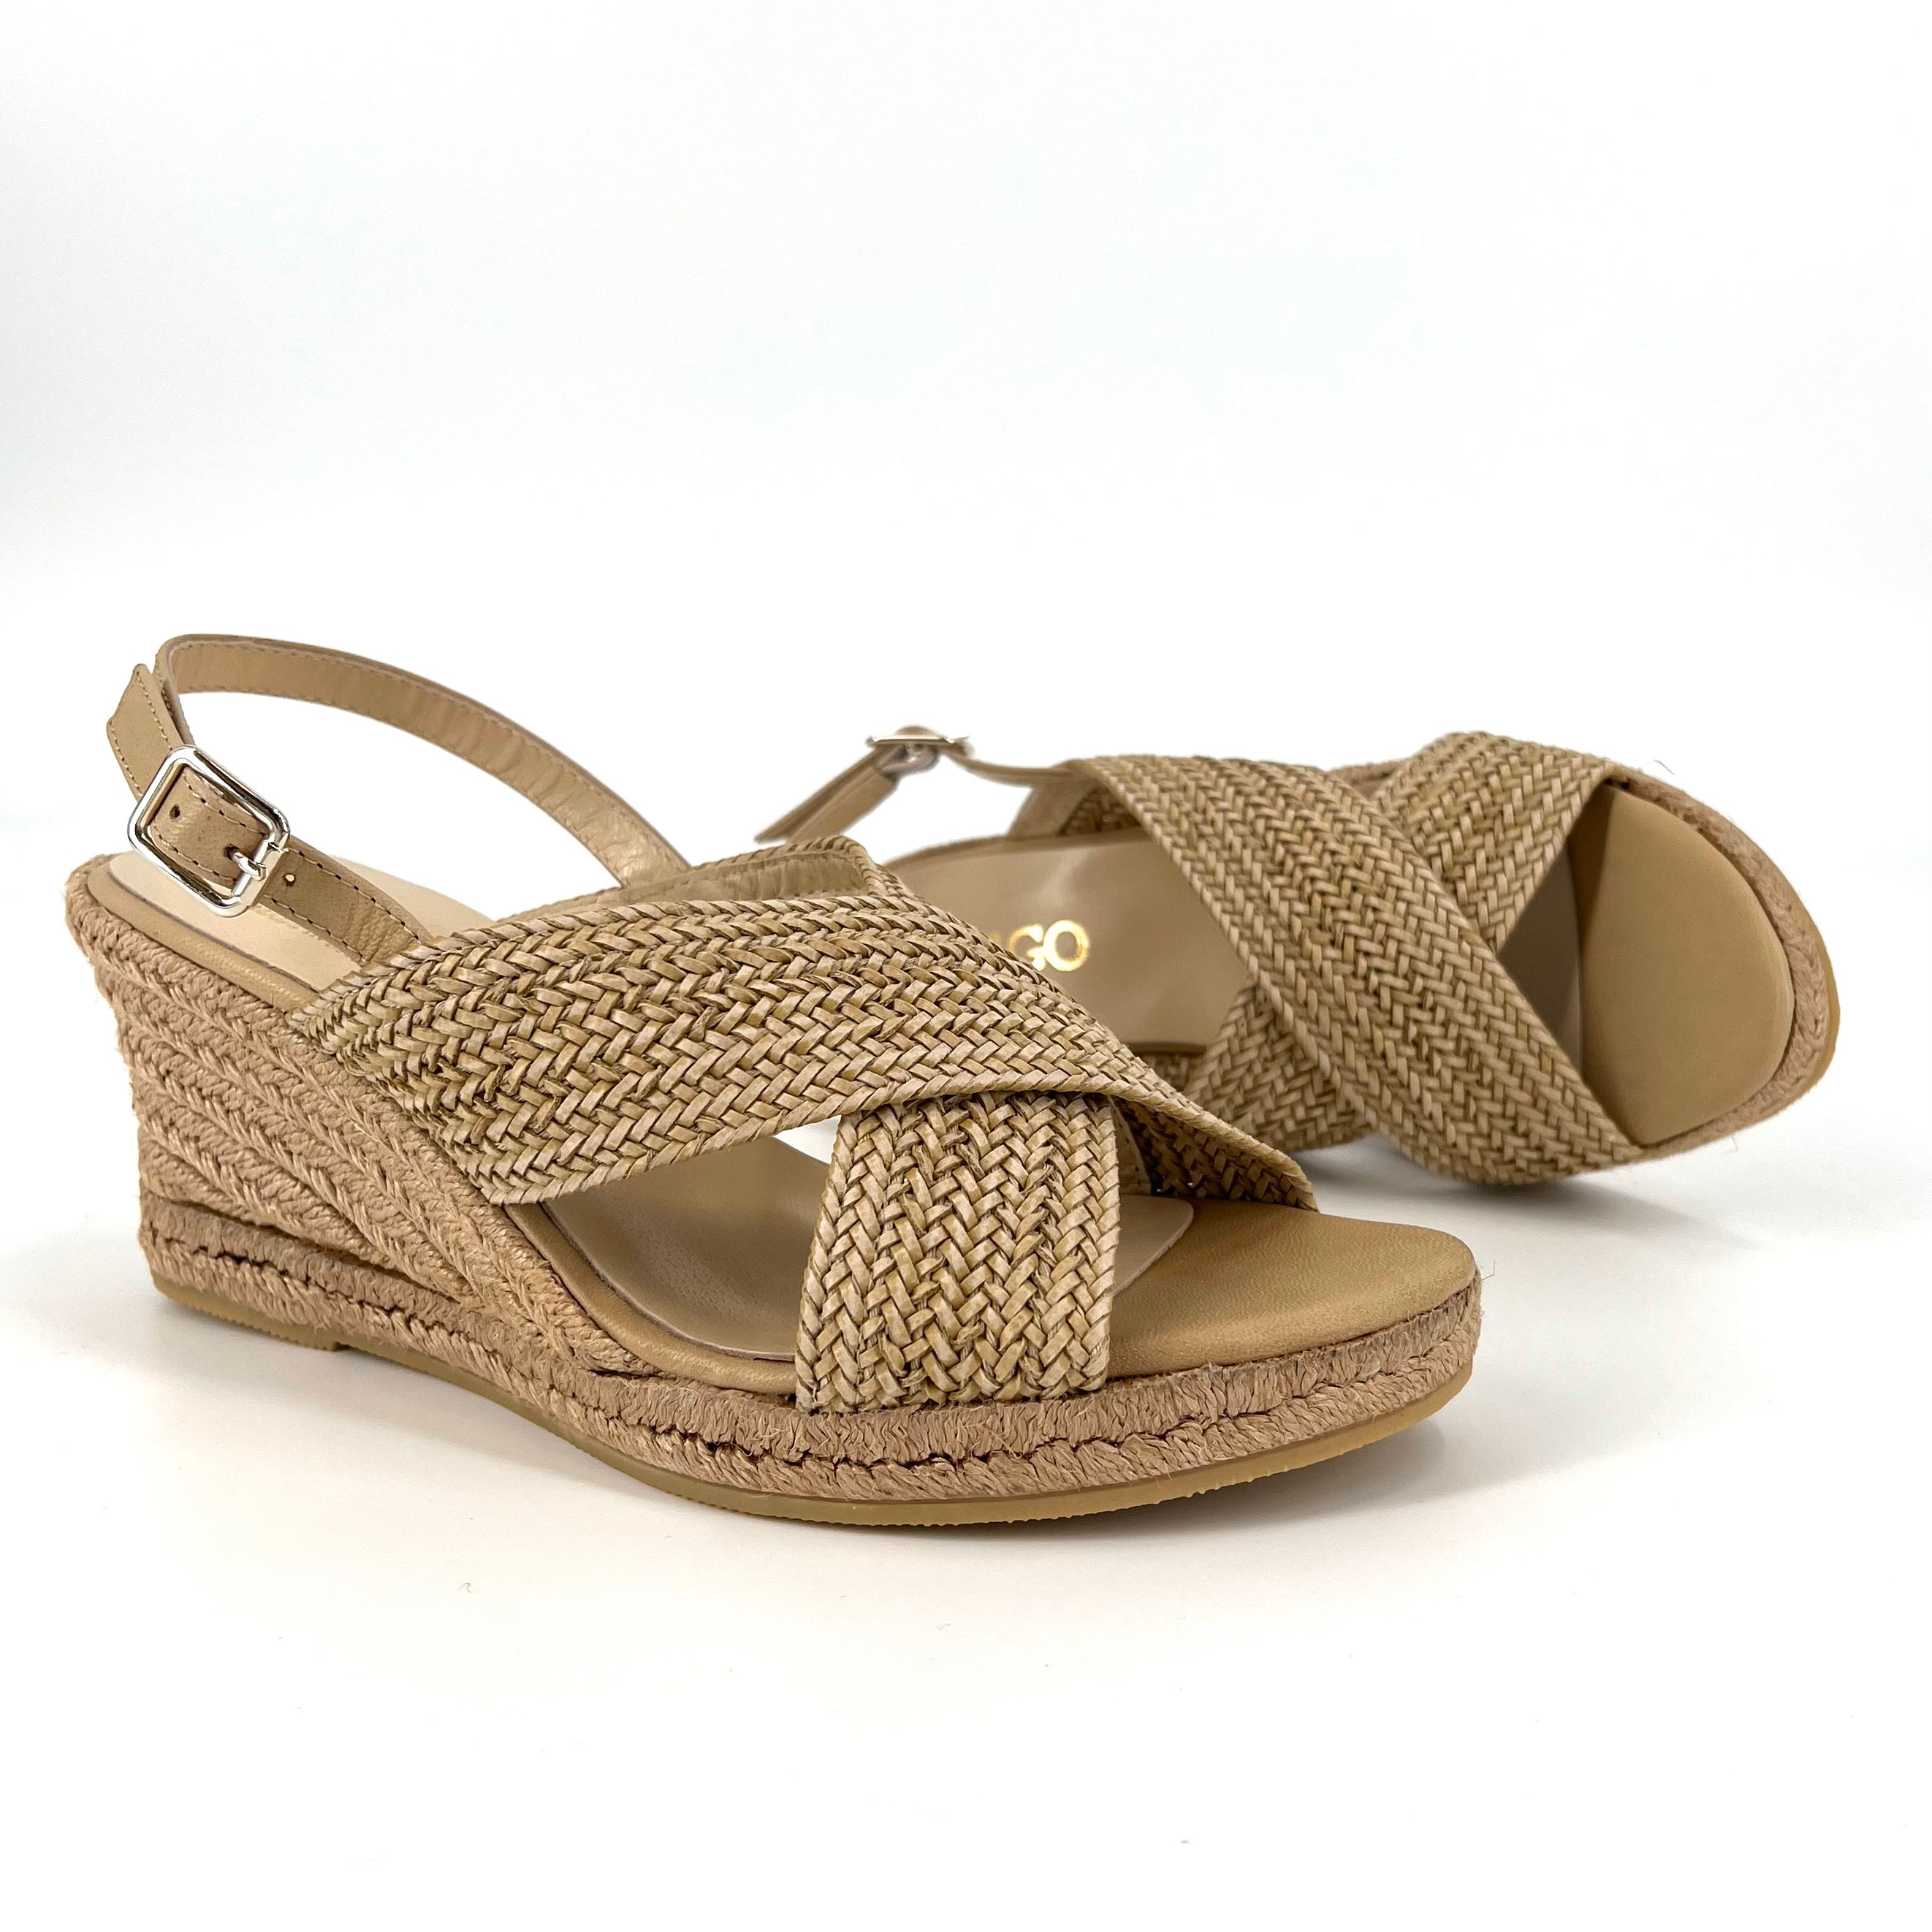 The Woven Leather Espadrille in Natural